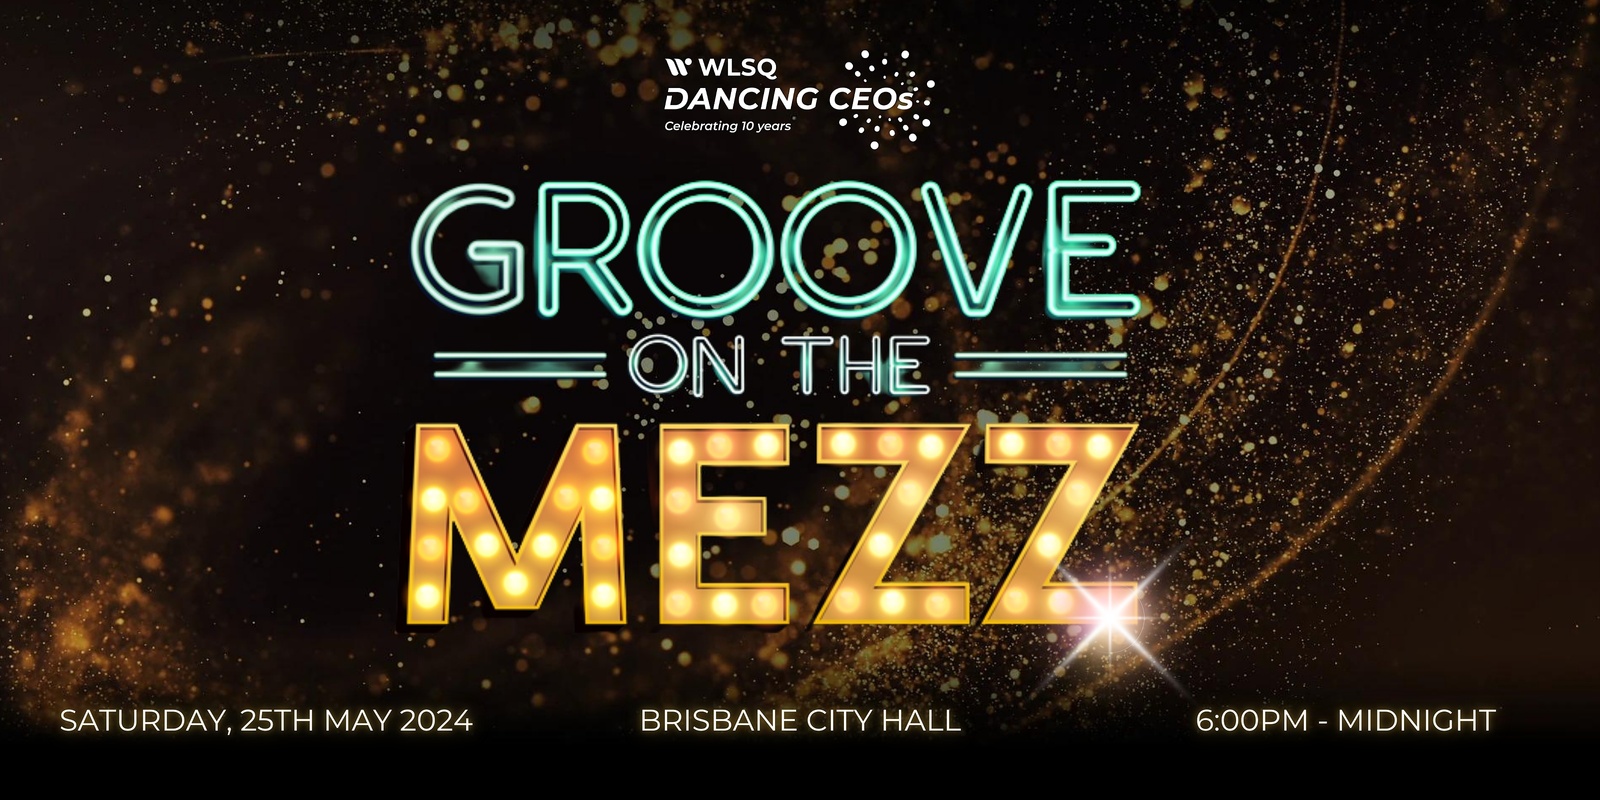 Banner image for Dancing CEOs Groove on the Mezz 2024